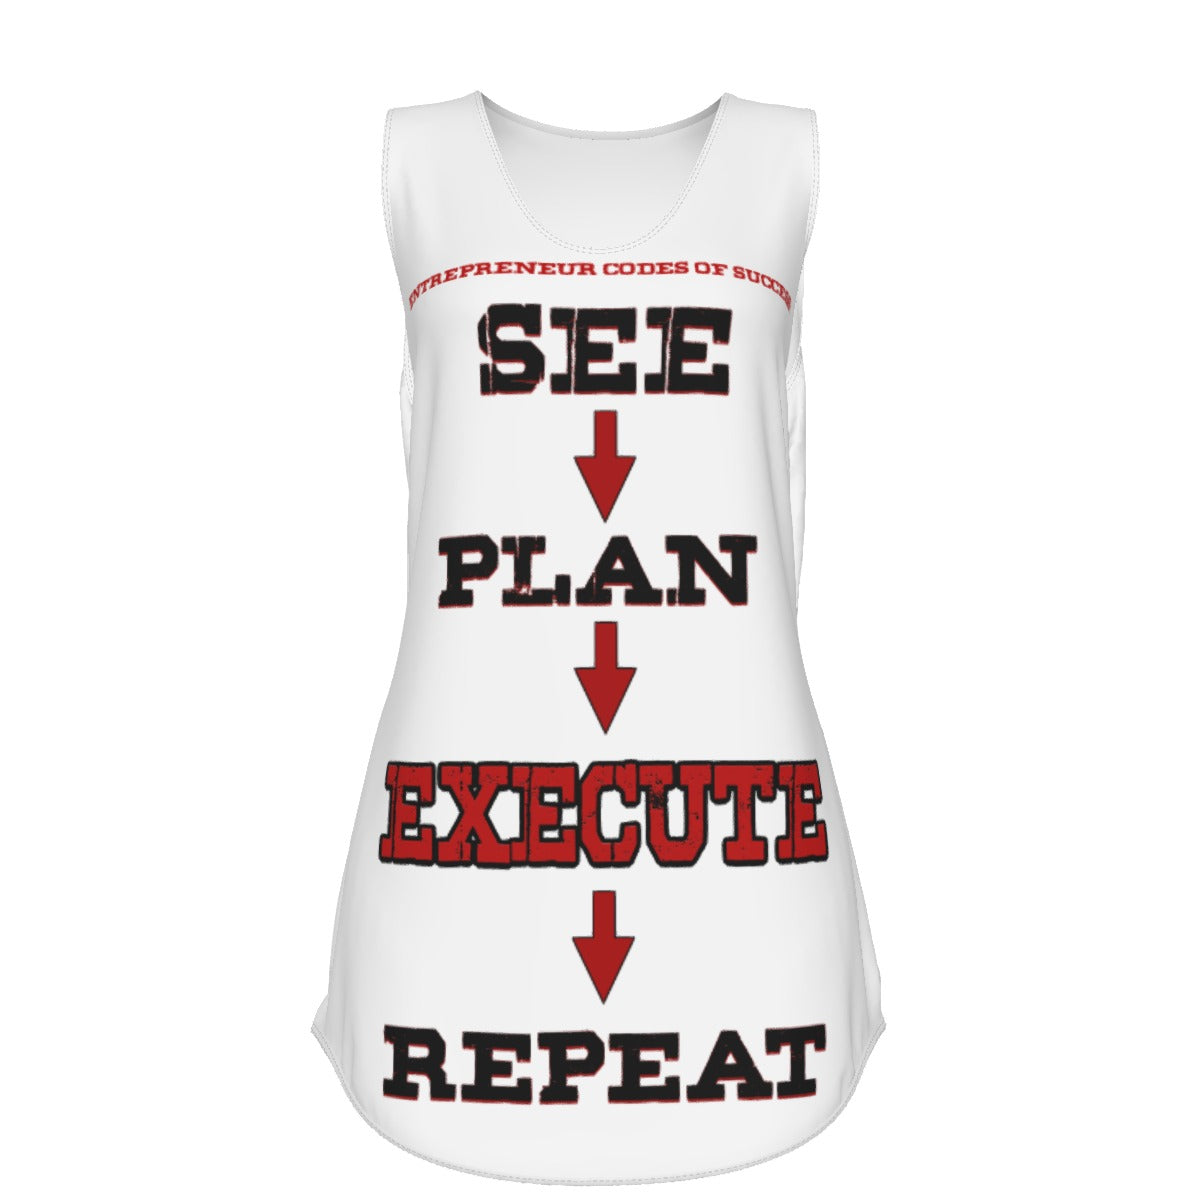 See --> Plan --> Execute --> Repeat Women's Hollow Top